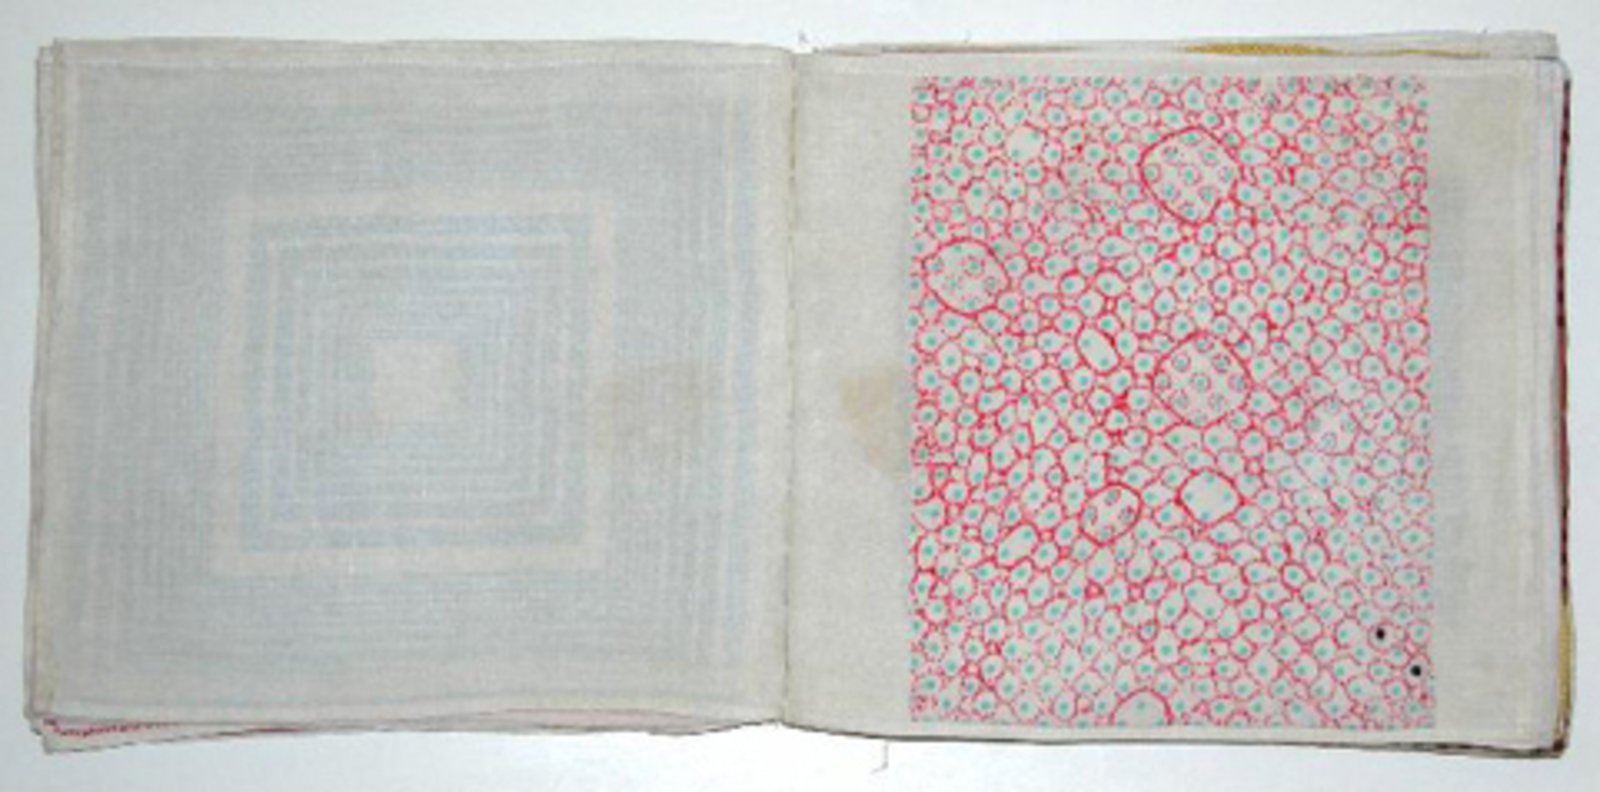 Louise Bourgeois, the cloth book Ode à l'oubli, 2002 – detail